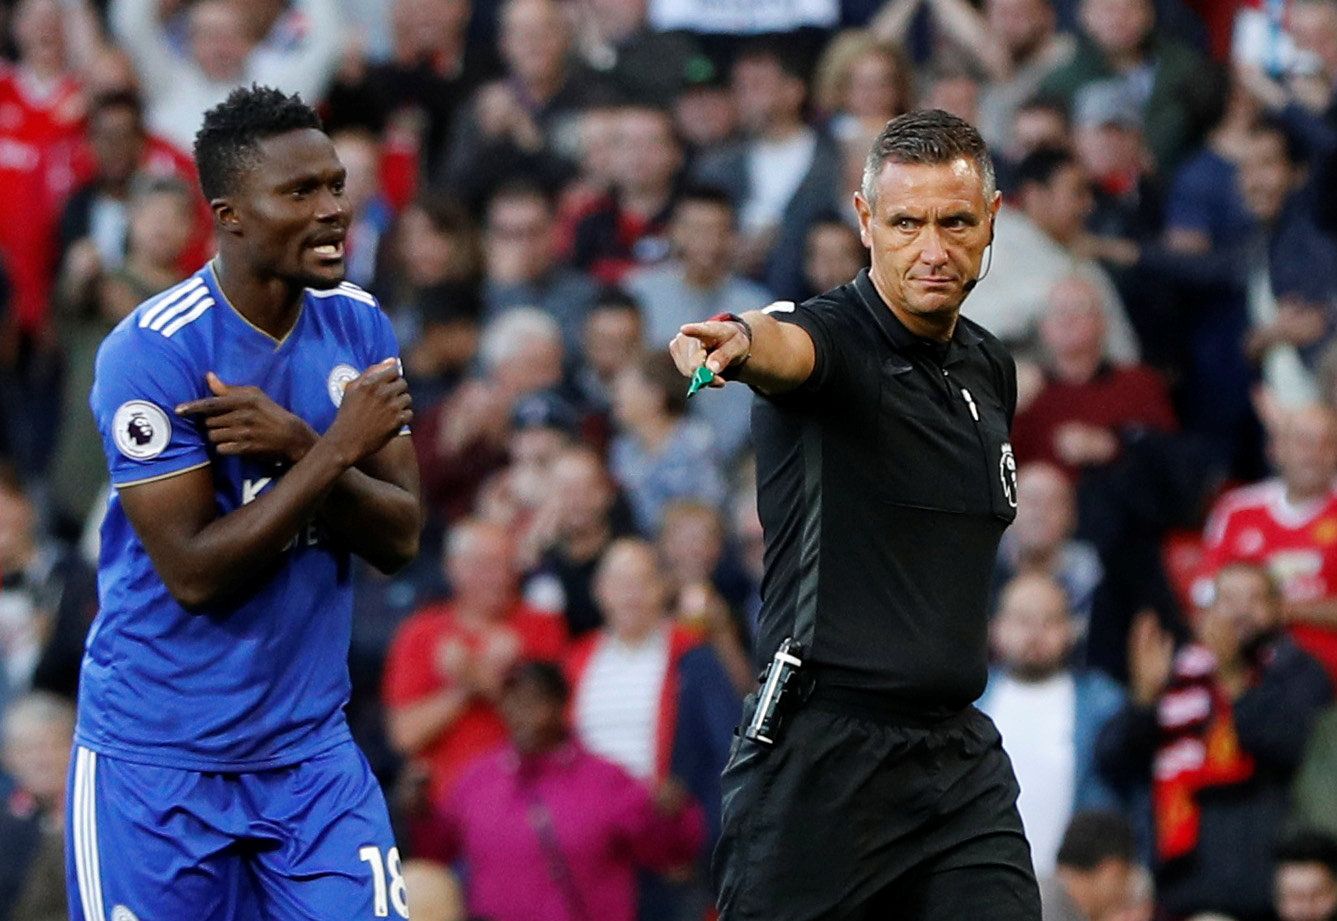 Soccer Football - Premier League - Manchester United v Leicester City - Old Trafford, Manchester, Britain - August 10, 2018  Referee Andre Marriner awards a penalty to Manchester United as Leicester City's Daniel Amartey reacts  Action Images via Reuters/Andrew Boyers  EDITORIAL USE ONLY. No use with unauthorized audio, video, data, fixture lists, club/league logos or "live" services. Online in-match use limited to 75 images, no video emulation. No use in betting, games or single club/league/pla